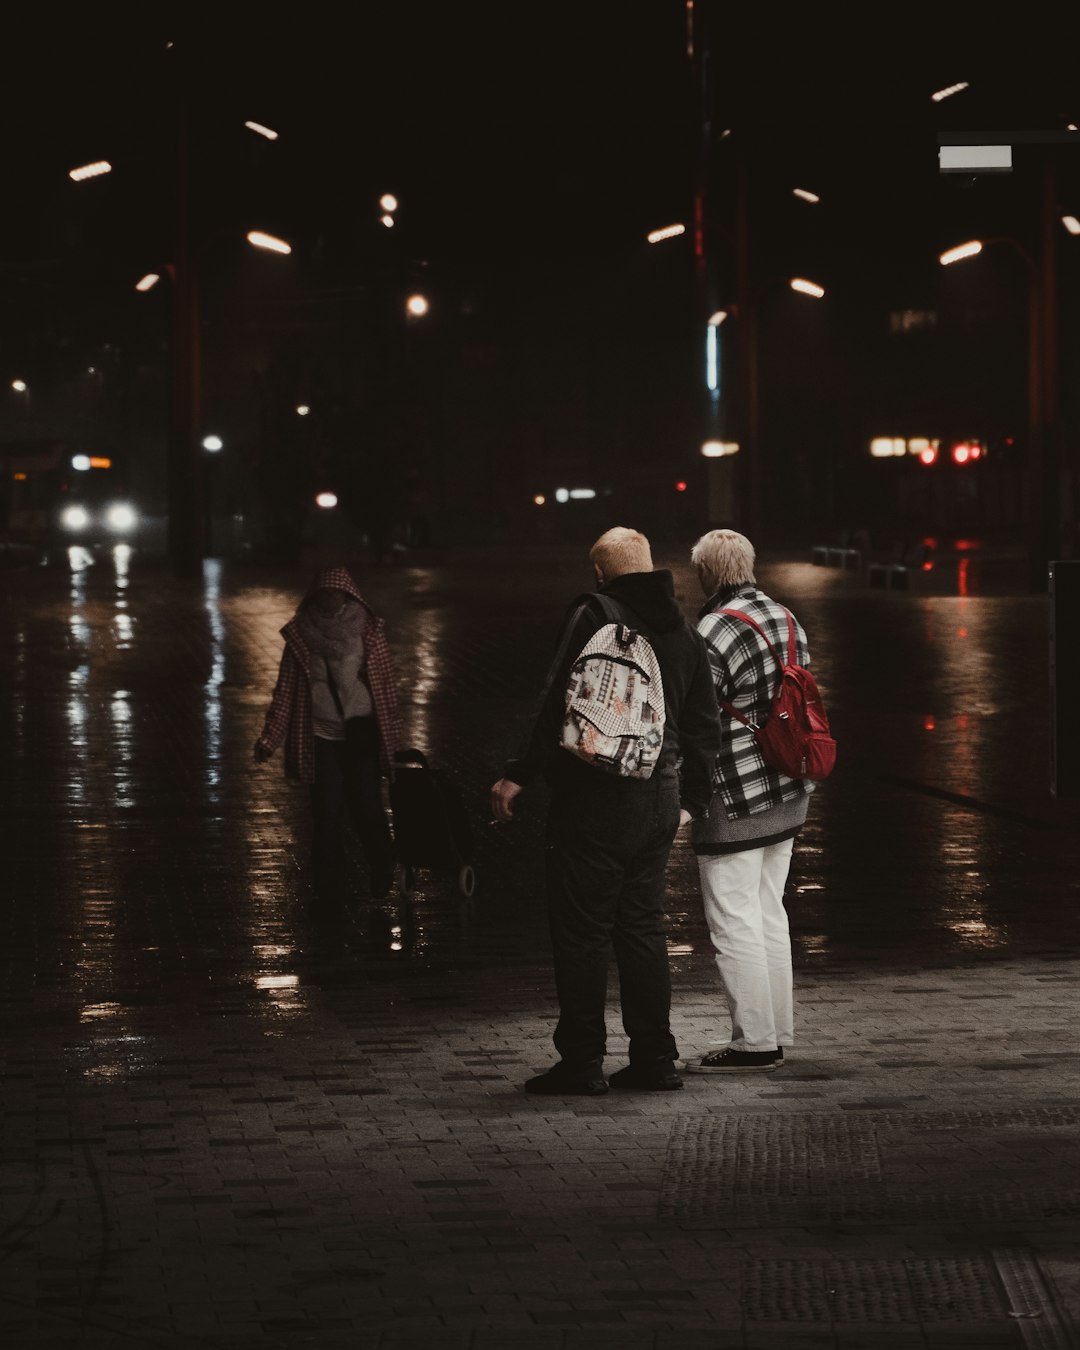 man in black and white jacket standing beside man in black jacket during night time